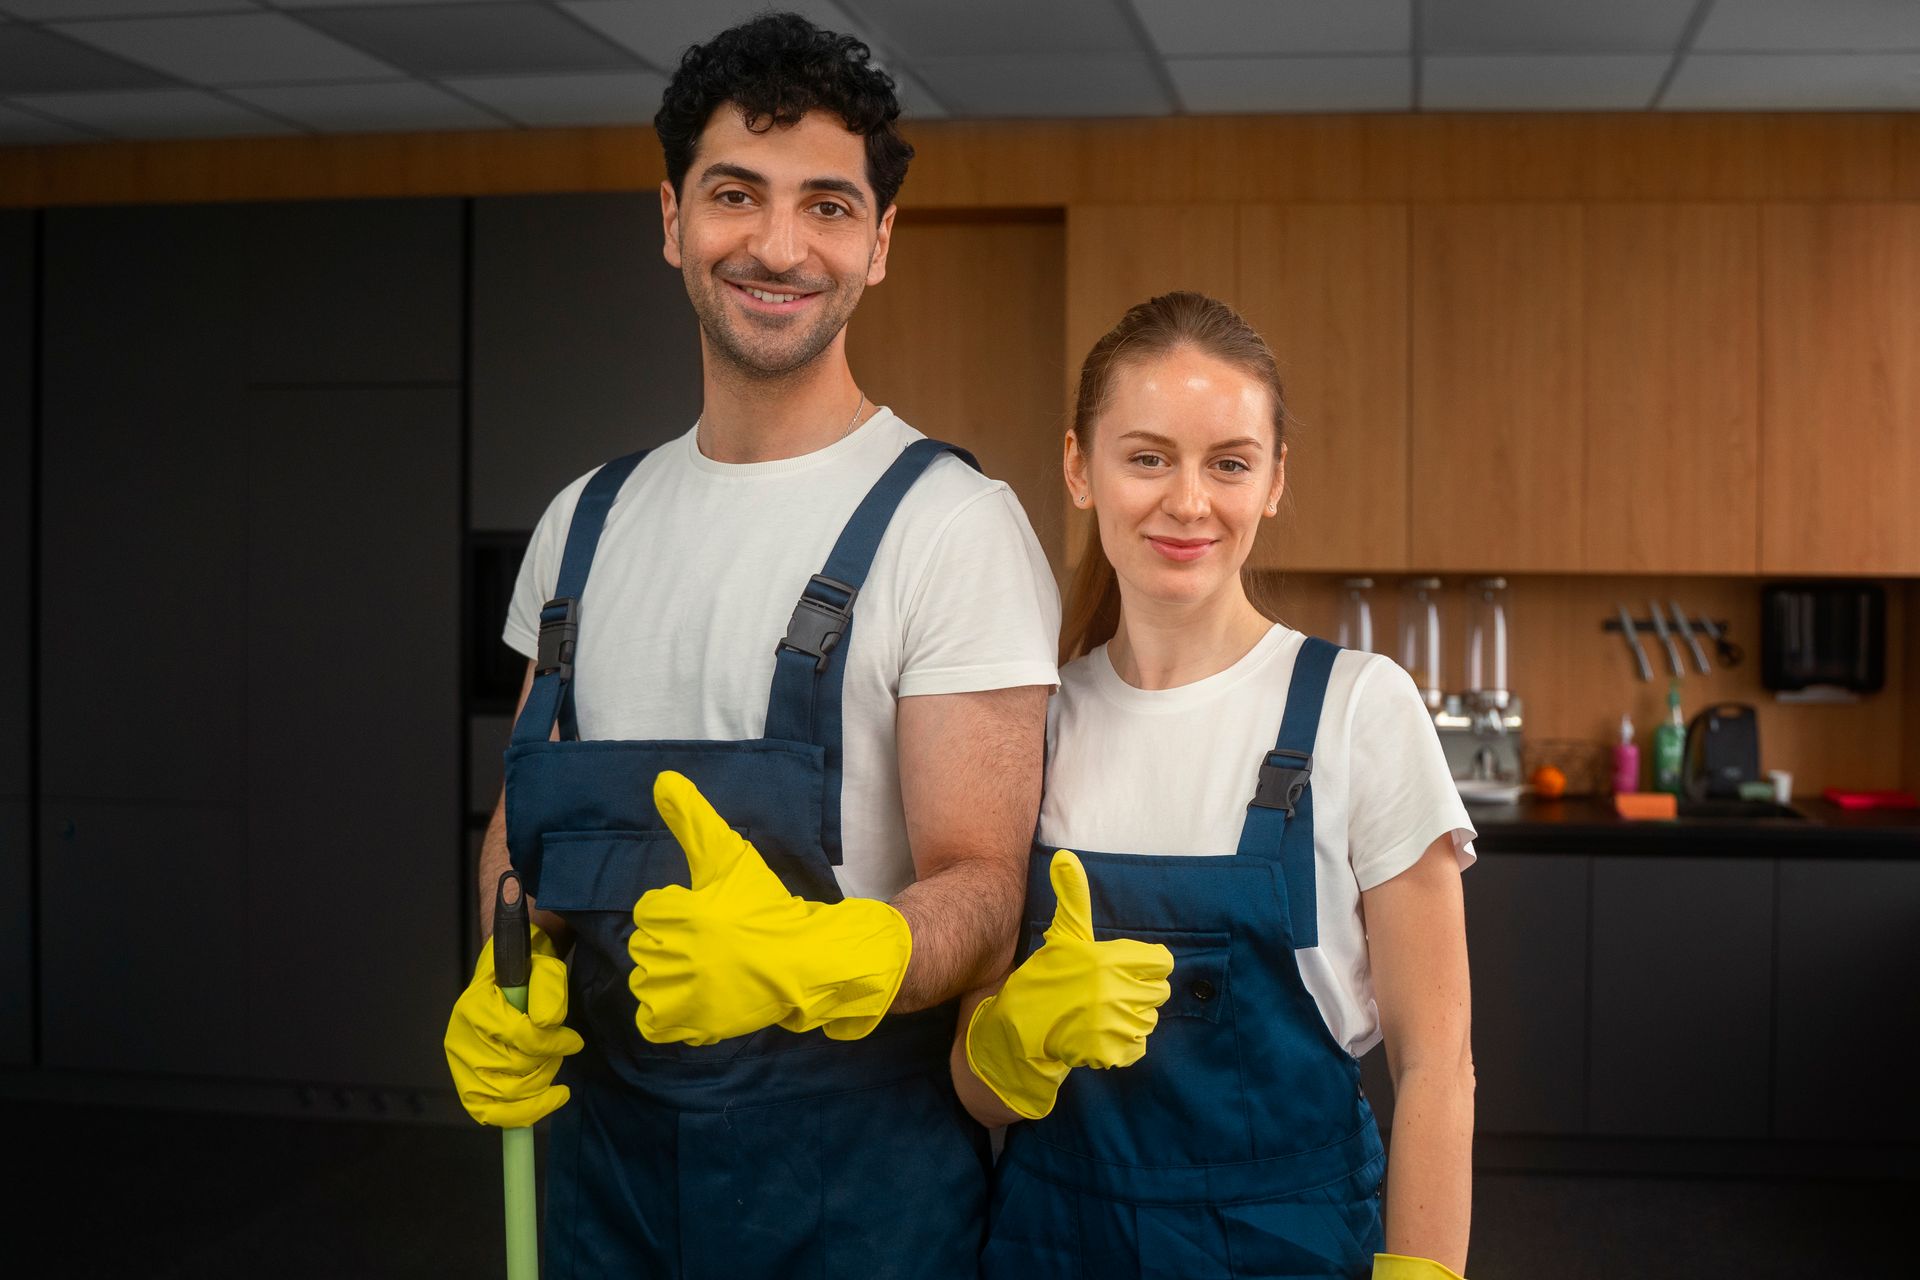 A man and a woman are giving a thumbs up in a kitchen.